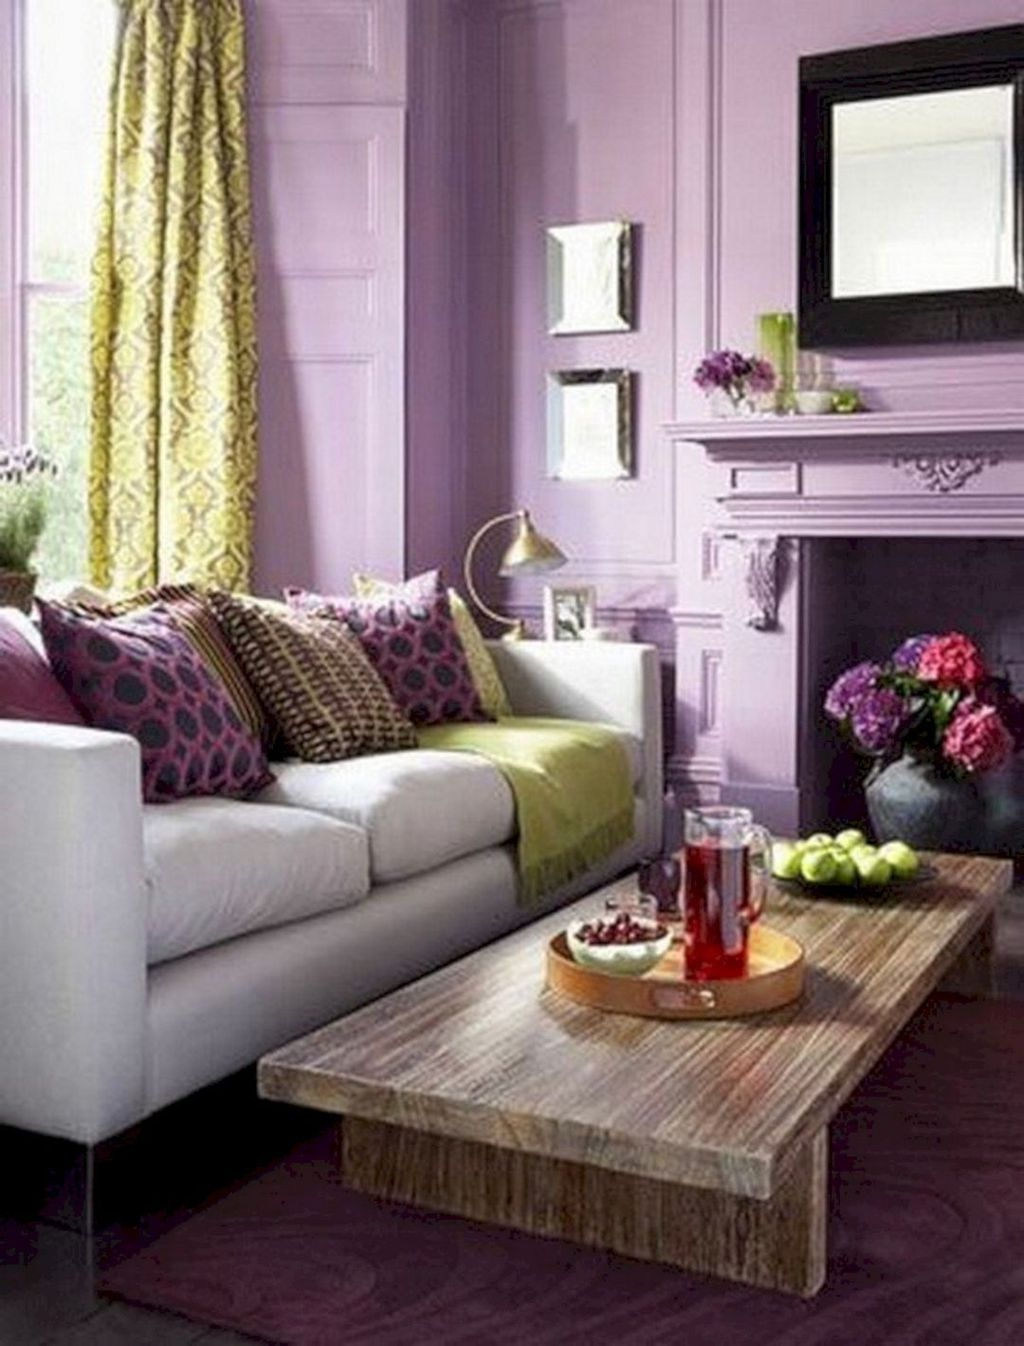 Awesome Living Room Green And Purple Interior Color Ideas18